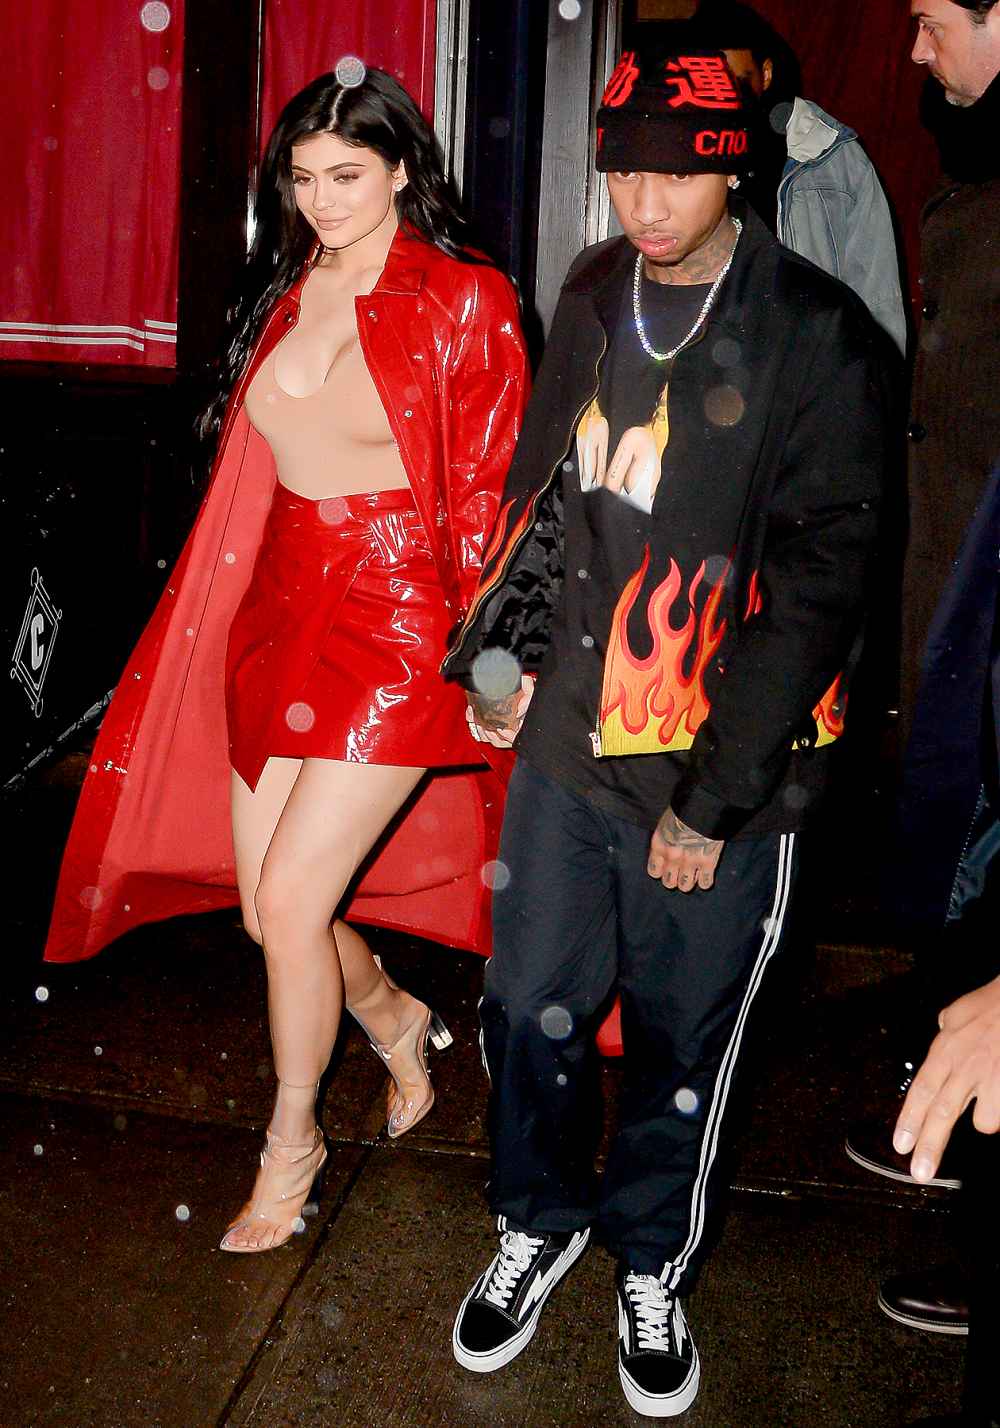 Kylie Jenner and Tyga are seen on January 17, 2017 in New York City.